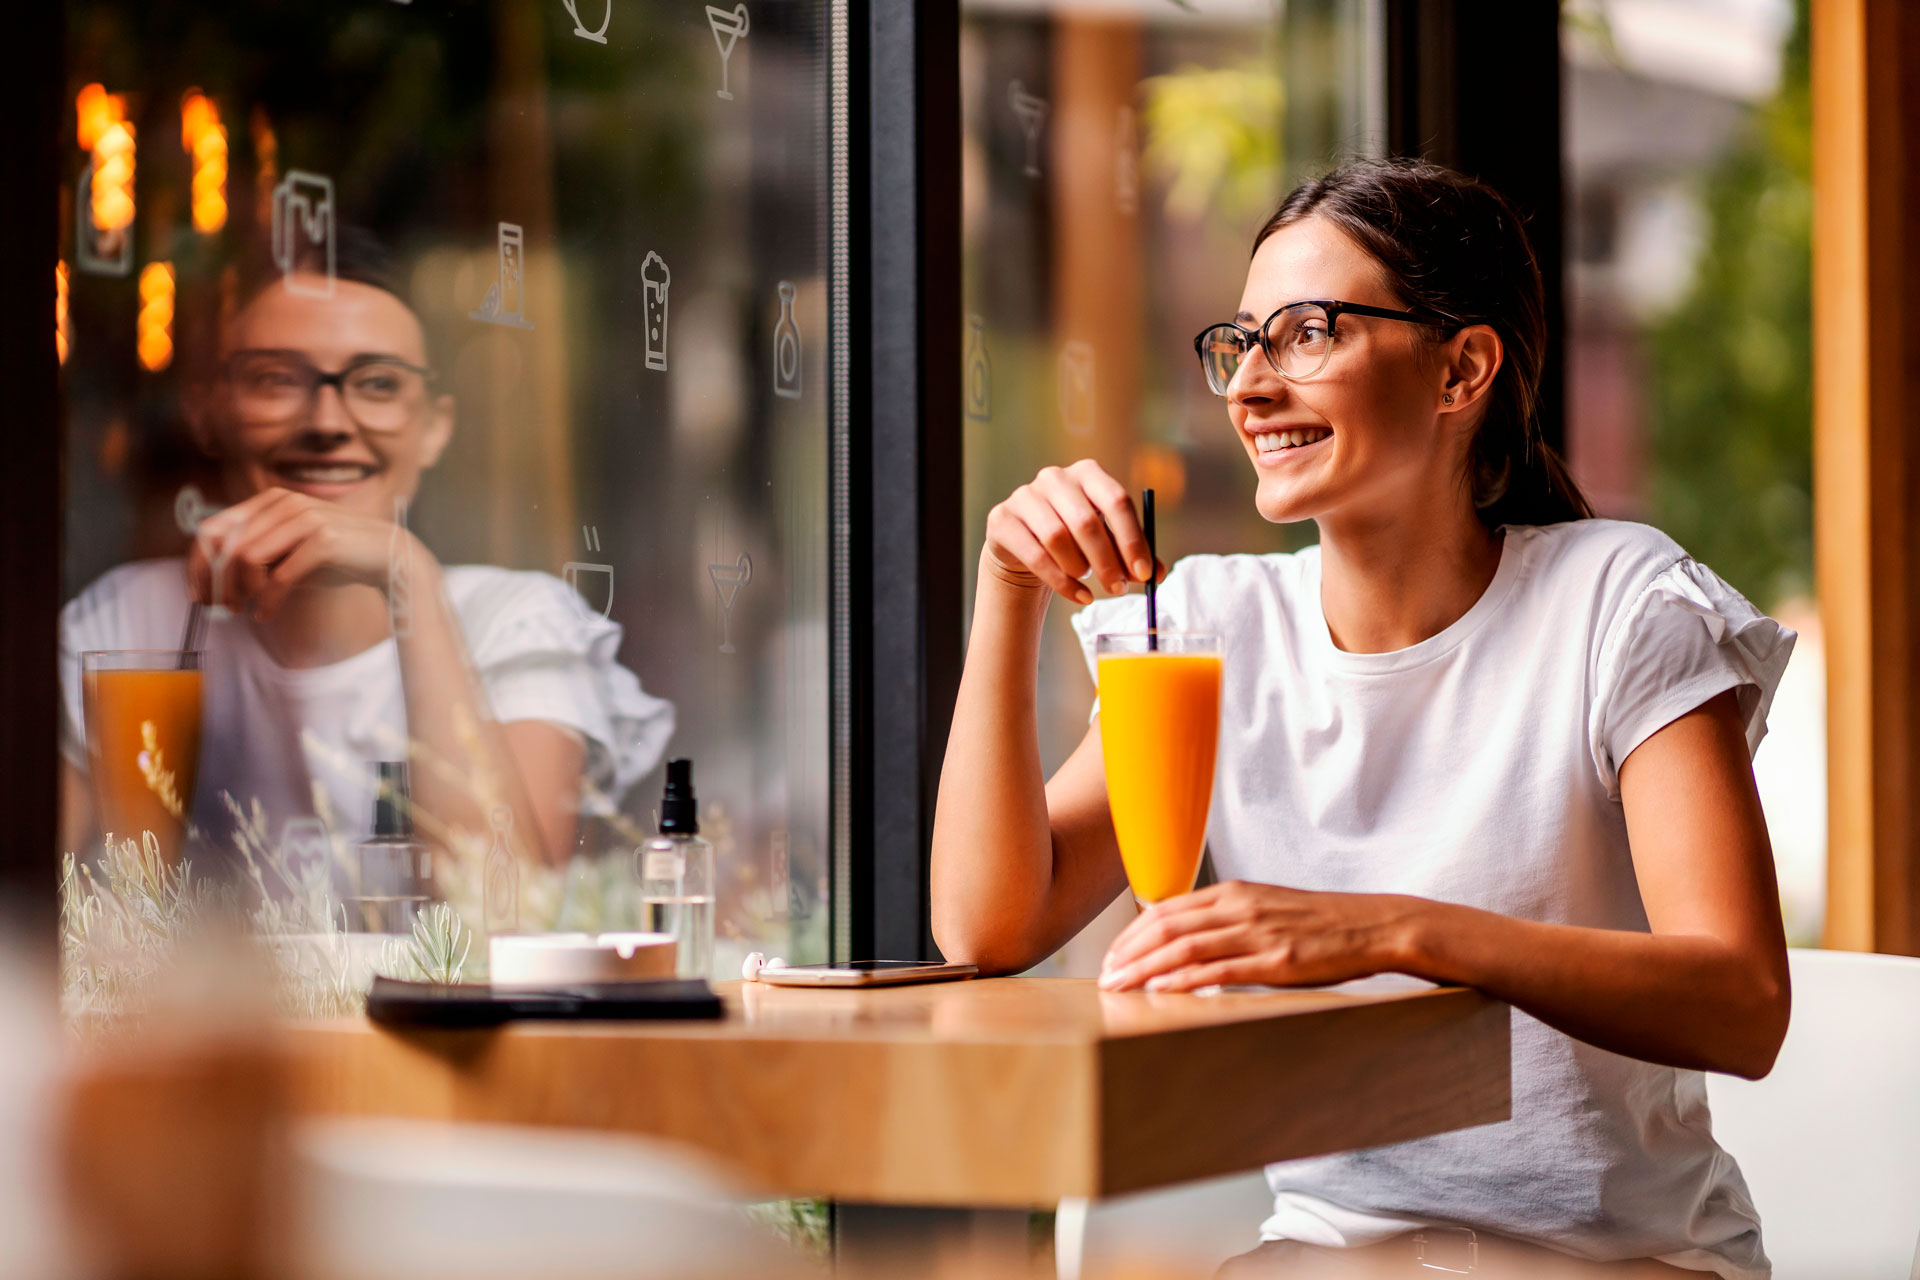 A woman smiling drinking a Rejooced juice drink by Beverage Genius